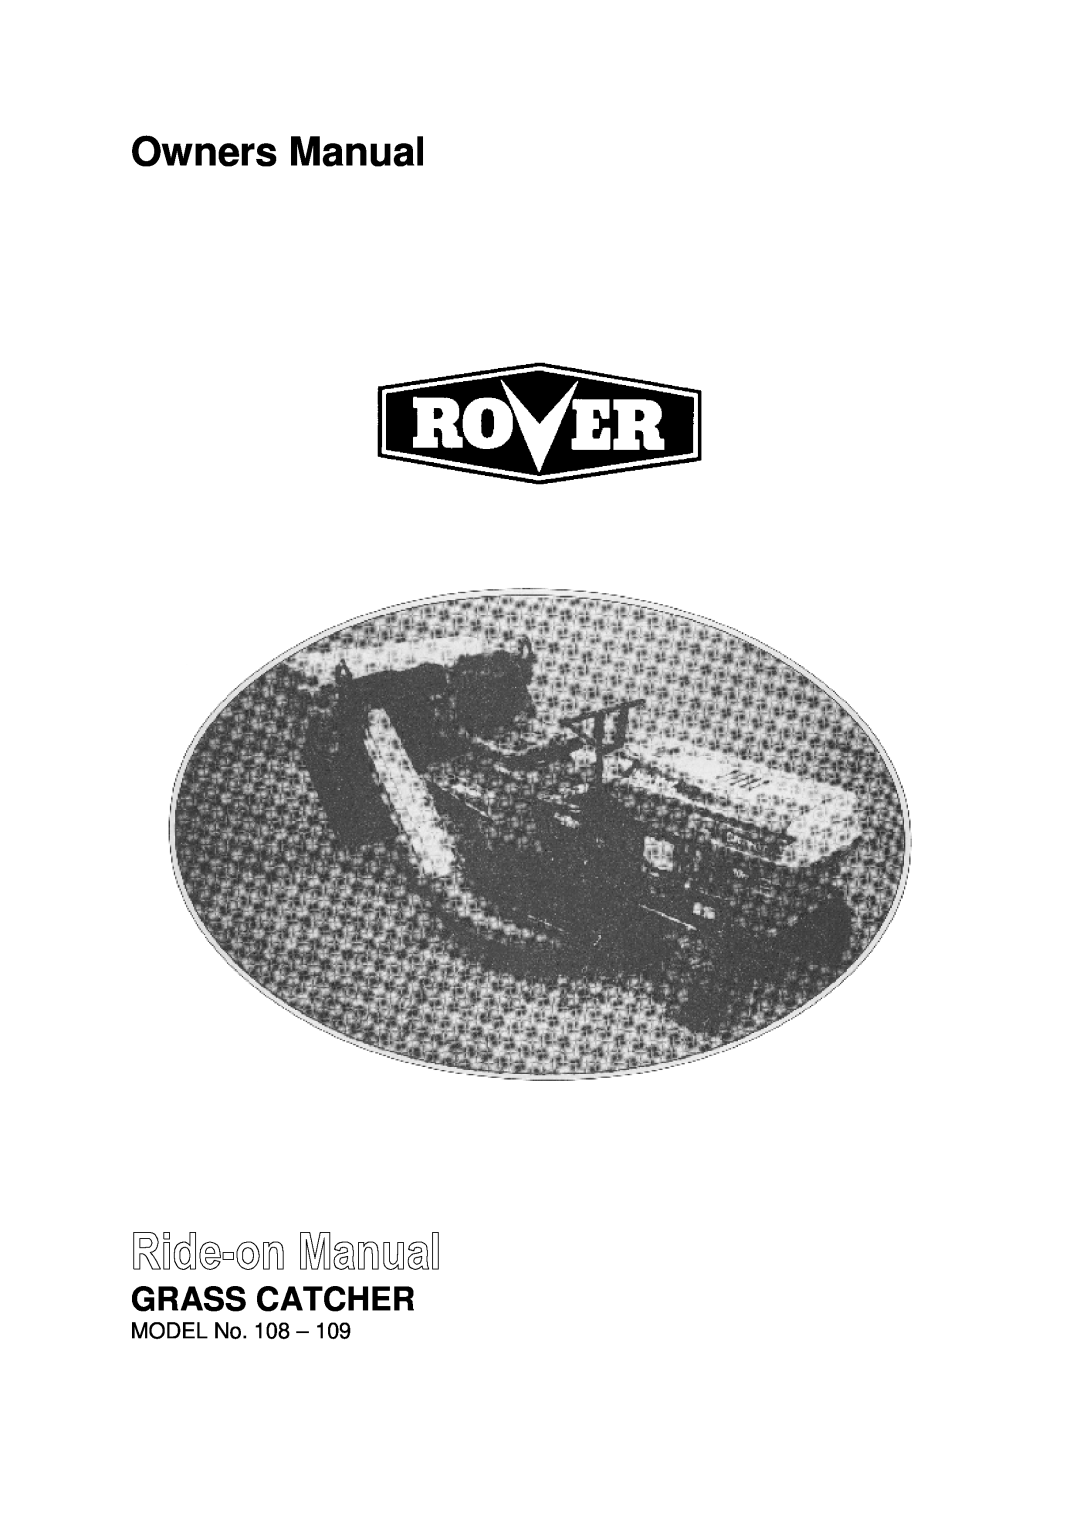 Rover 108, 109 owner manual Grass Catcher, MODEL No. 108 